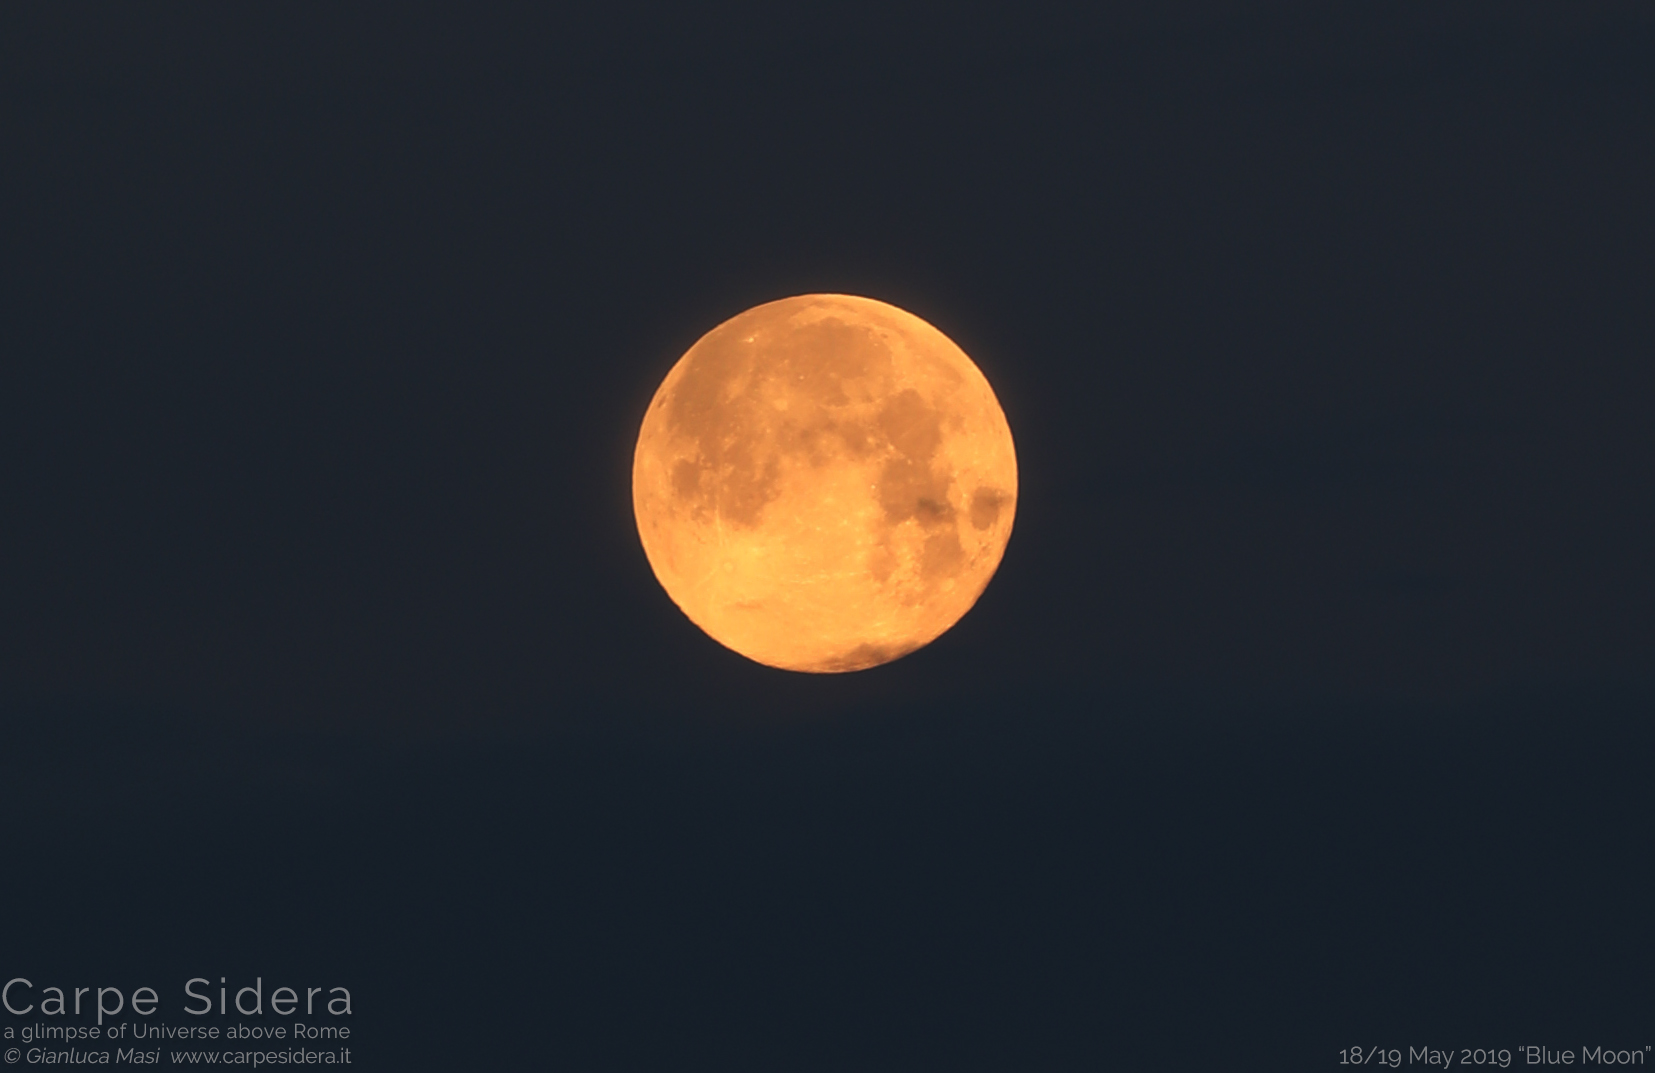 The 18/19 May 2019 "Blue Moon"